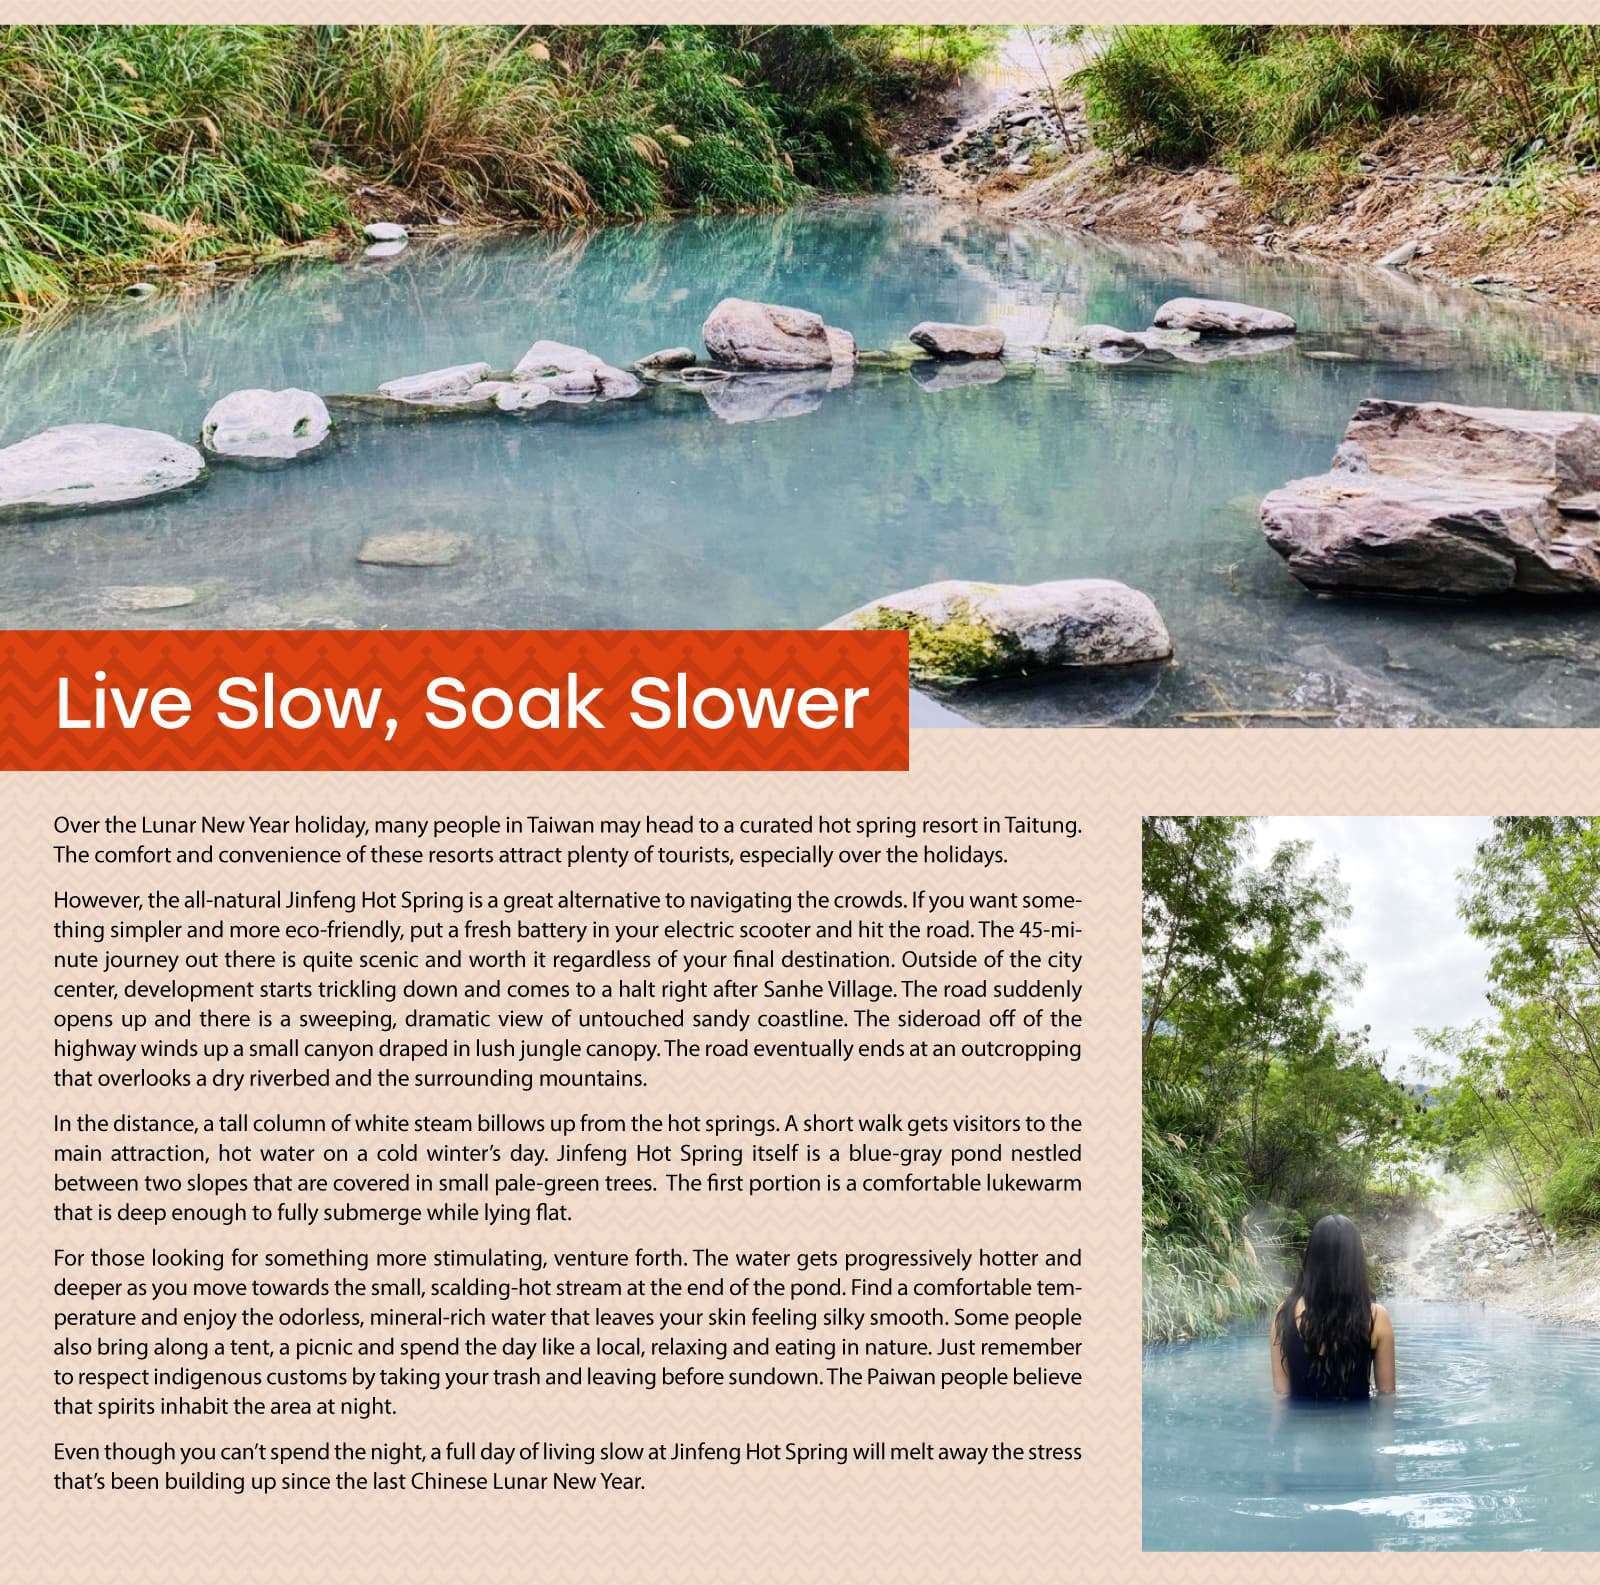 Live Slow, Soak Slower

Over the Lunar New Year holiday, many people in Taiwan may head to a curated hot spring resort in Taitung. The comfort and convenience of these resorts attract plenty of tourists, especially over the holidays.

However, the all-natural Jinfeng Hot Spring is a great alternative to navigating the crowds. If you want something simpler and more eco-friendly, put a fresh battery in your electric scooter and hit the road. The 45-minute journey out there is quite scenic and worth it regardless of your final destination. Outside of the city center, development starts trickling down and comes to a halt right after Sanhe Village. The road suddenly opens up and there is a sweeping, dramatic view of untouched sandy coastline. The sideroad off of the highway winds up a small canyon draped in lush jungle canopy. The road eventually ends at an outcropping that overlooks a dry riverbed and the surrounding mountains.

    In the distance, a tall column of white steam billows up from the hot springs. A short walk gets visitors to the main attraction, hot water on a cold winter’s day. Jinfeng Hot Spring itself is a blue-gray pond nestled between two slopes that are covered in small pale-green trees.  The first portion is a comfortable lukewarm that is deep enough to fully submerge while lying flat.

For those looking for something more stimulating, venture forth. The water gets progressively hotter and deeper as you move towards the small, scalding-hot stream at the end of the pond. Find a comfortable temperature and enjoy the odorless, mineral-rich water that leaves your skin feeling silky smooth. Some people also bring along a tent, a picnic and spend the day like a local, relaxing and eating in nature. Just remember to respect indigenous customs by taking your trash and leaving before sundown. The Paiwan people believe that spirits inhabit the area at night.

Even though you can’t spend the night, a full day of living slow at Jinfeng Hot Spring will melt away the stress that’s been building up since the last Chinese Lunar New Year.
